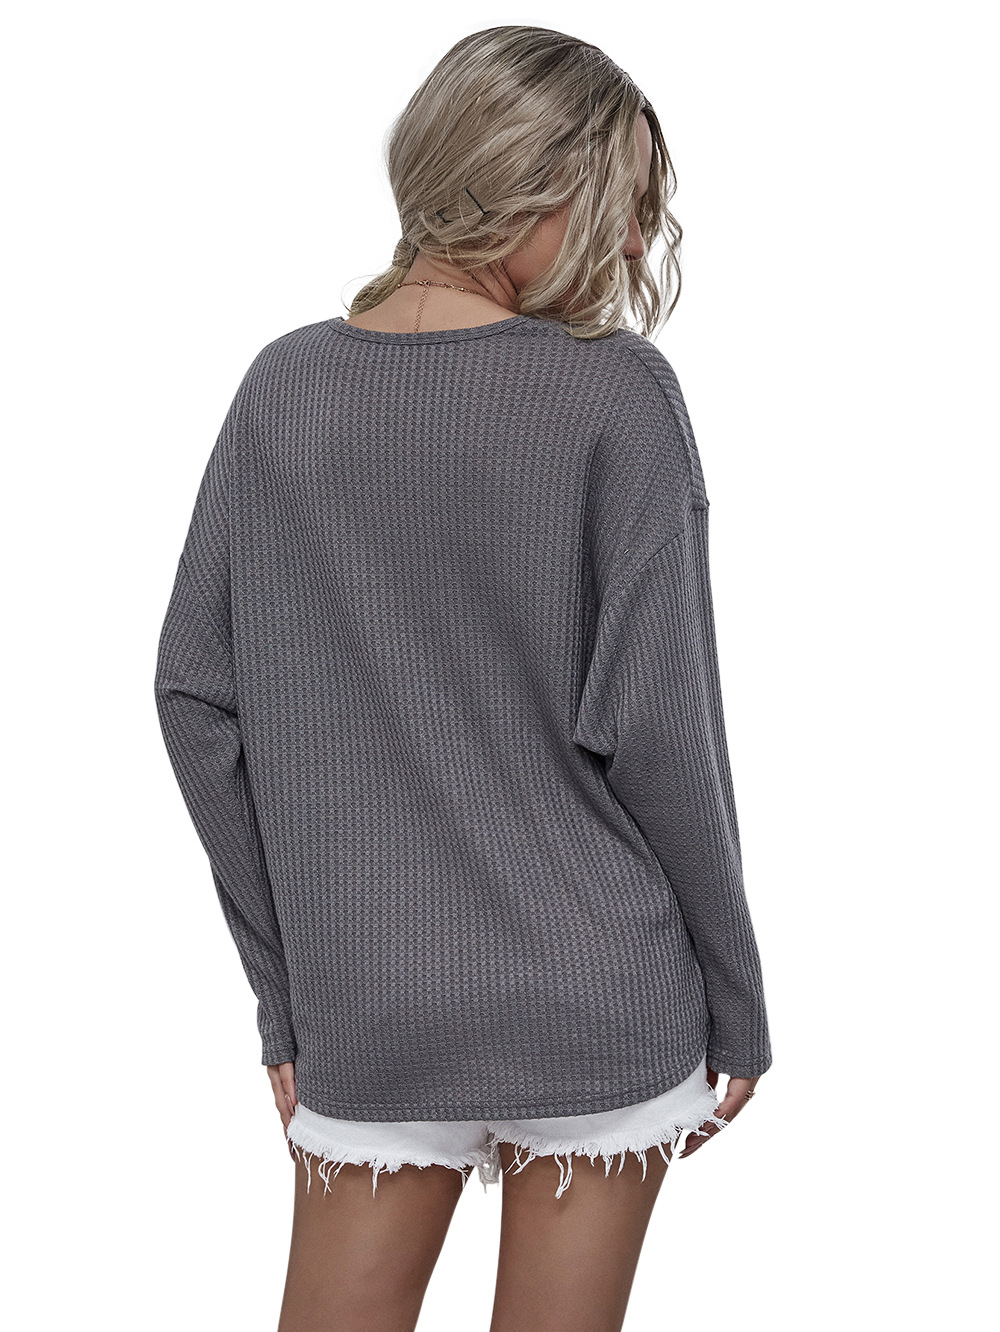 Autumn new knitted V-neck mesh fashion casual women s sweater  NHDF49